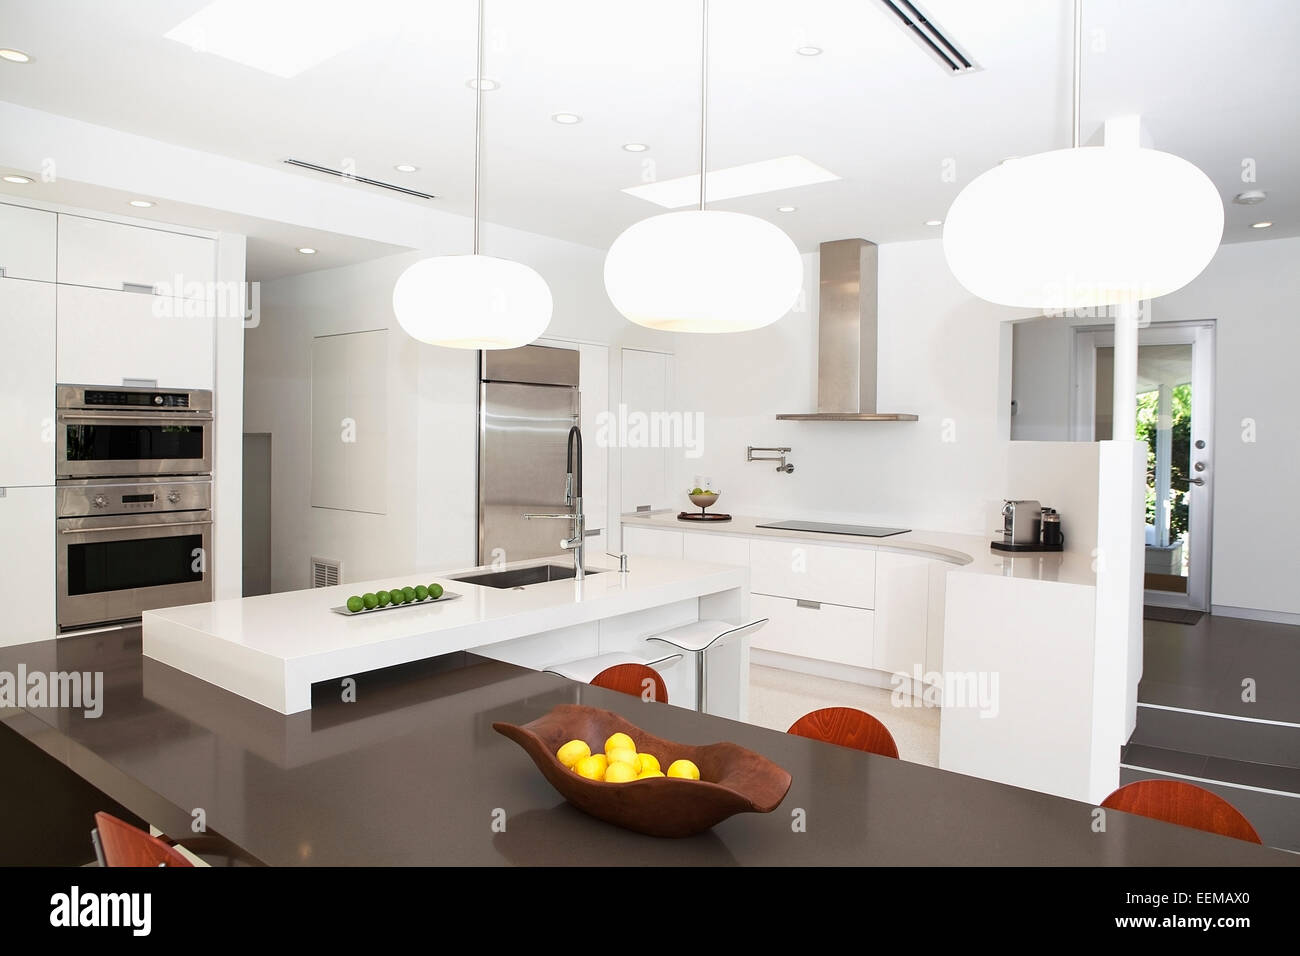 Table, countertops and light fixtures in modern kitchen Stock Photo